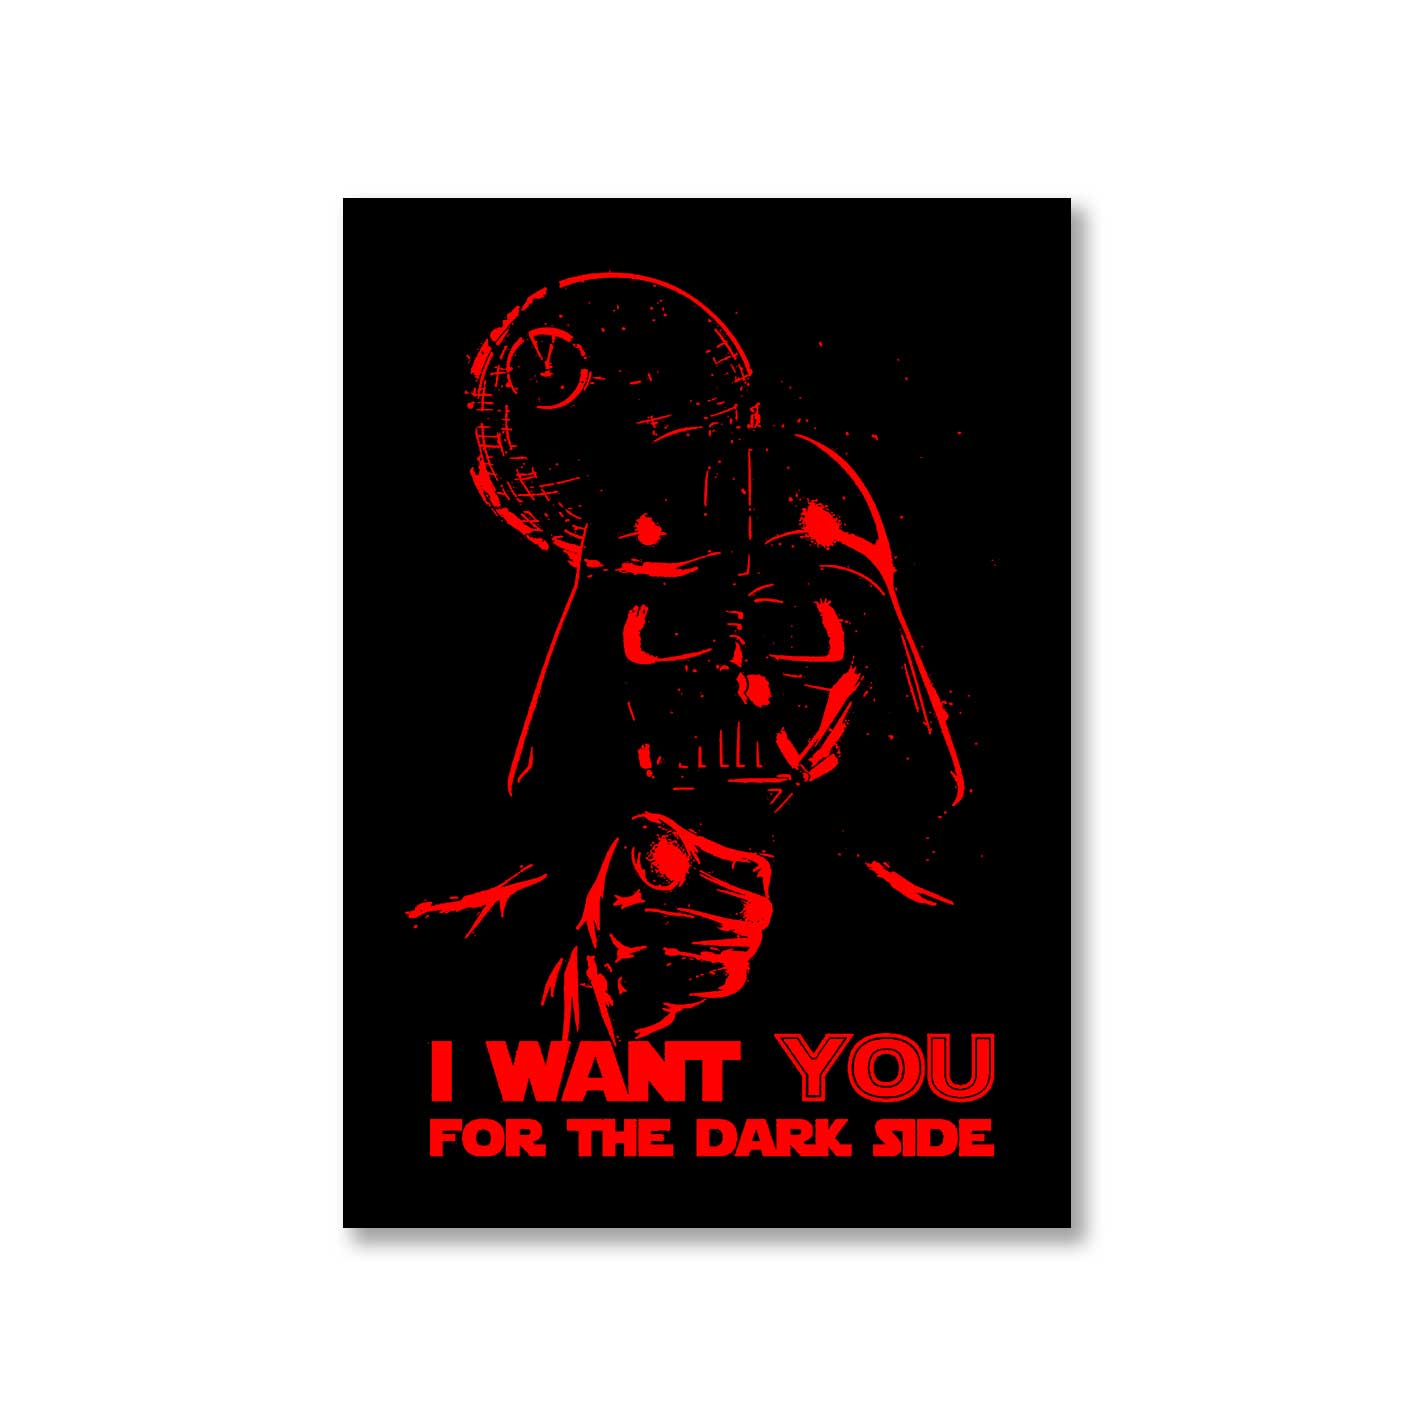 star wars i want you for the dark side poster wall art buy online india the banyan tee tbt a4 darth vader